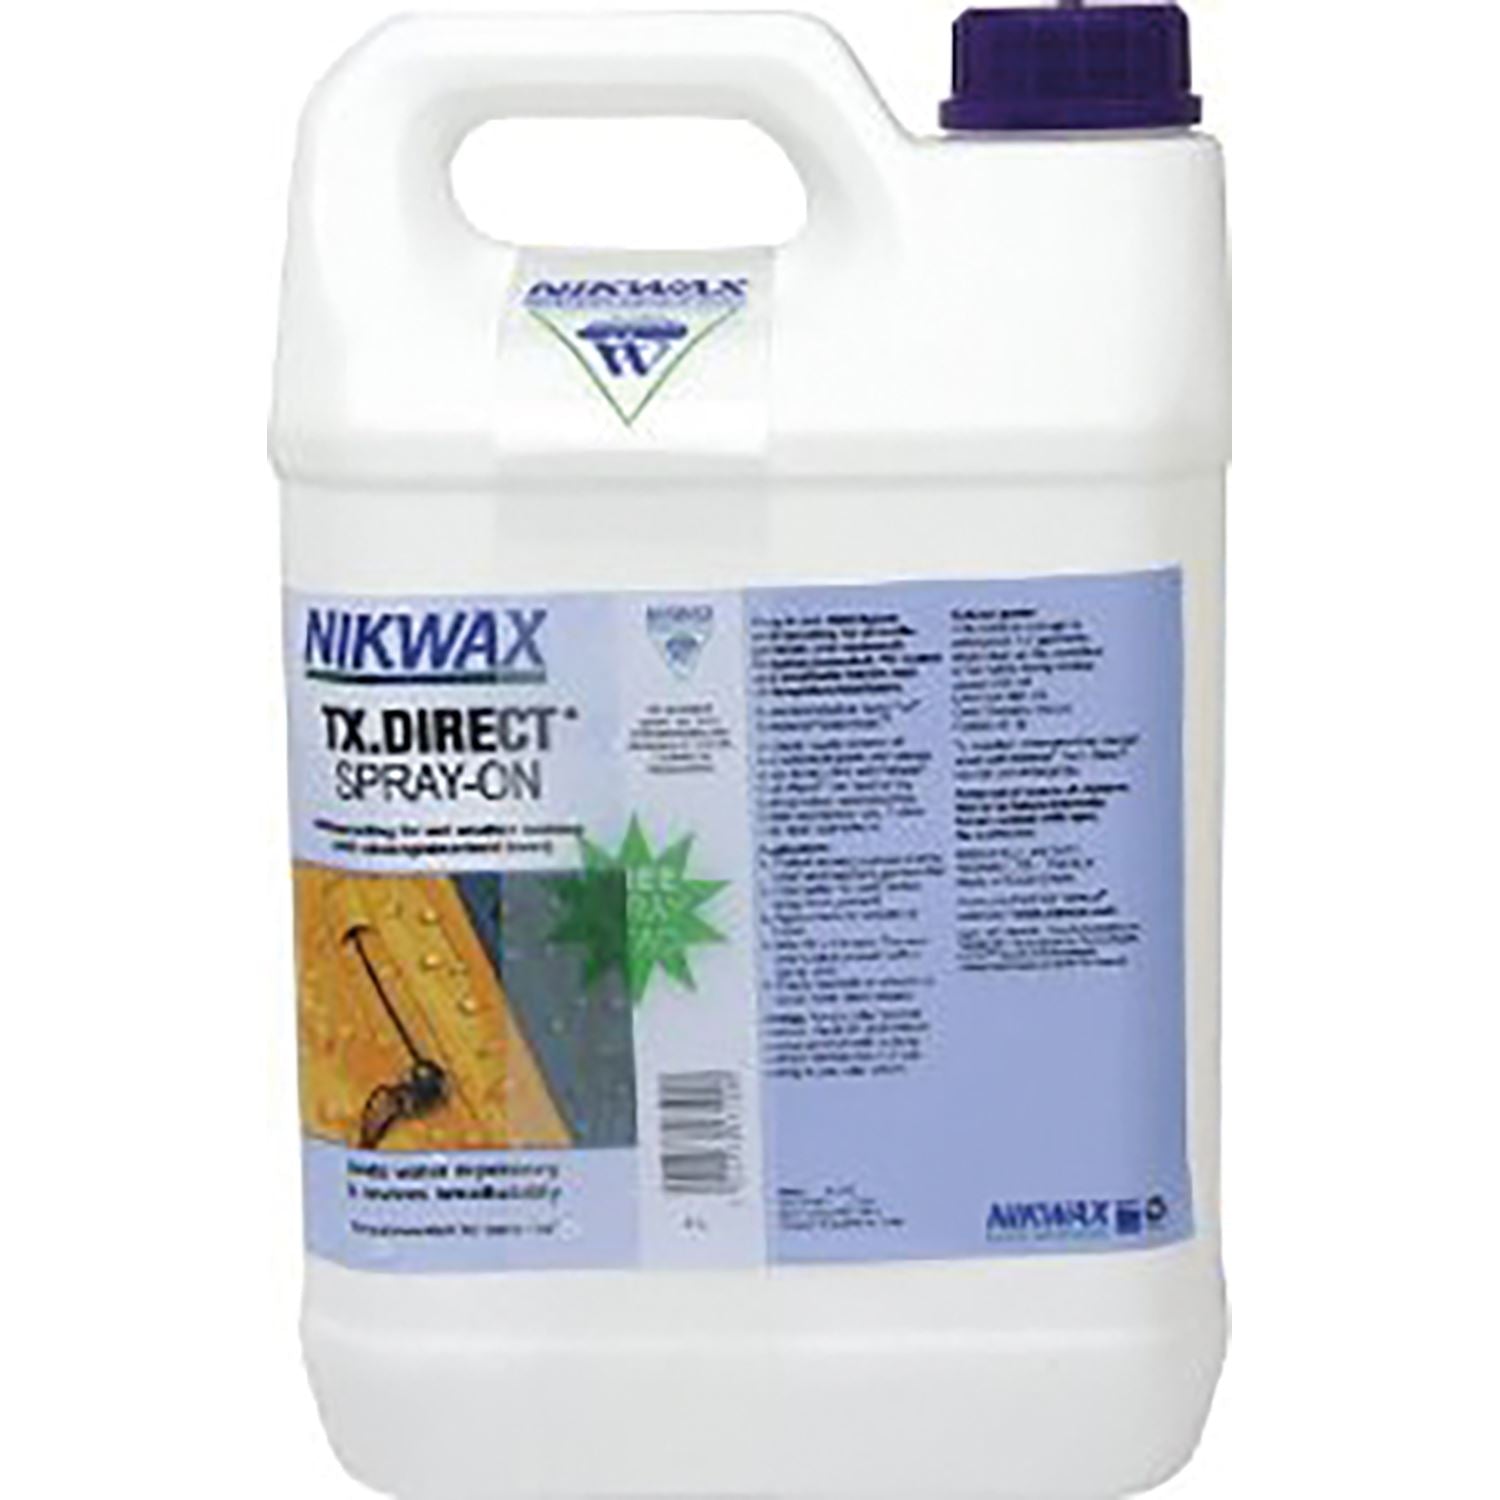 Nikwax Tx Direct Spray-On - Just Horse Riders